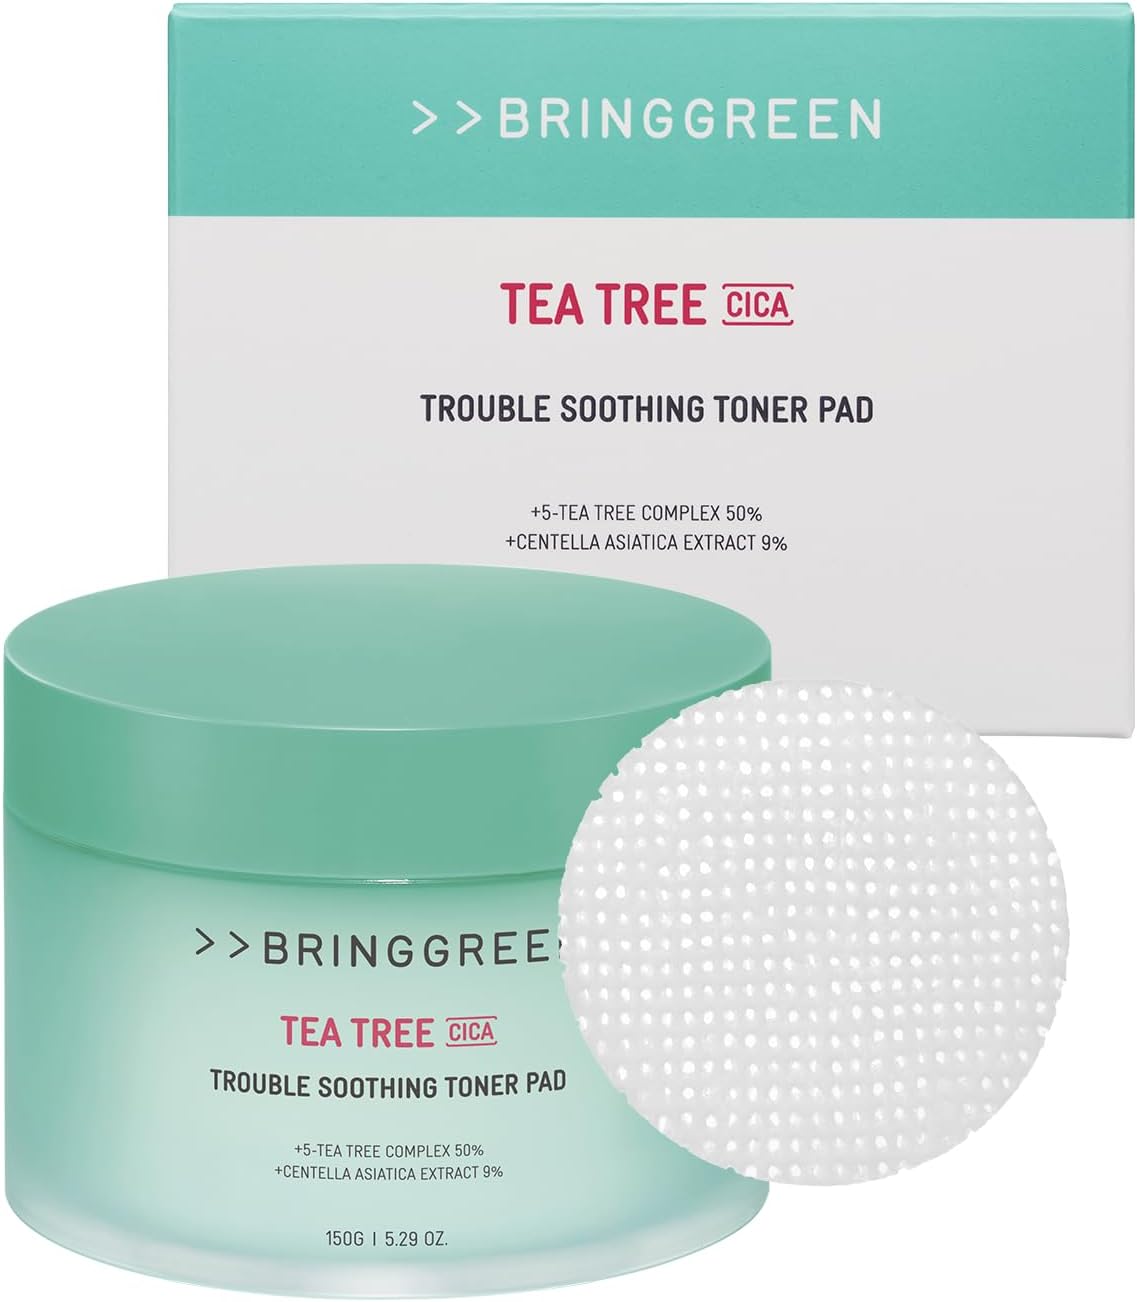 Bring Green Tea Tree Cica Trouble Soothing Toner Pad